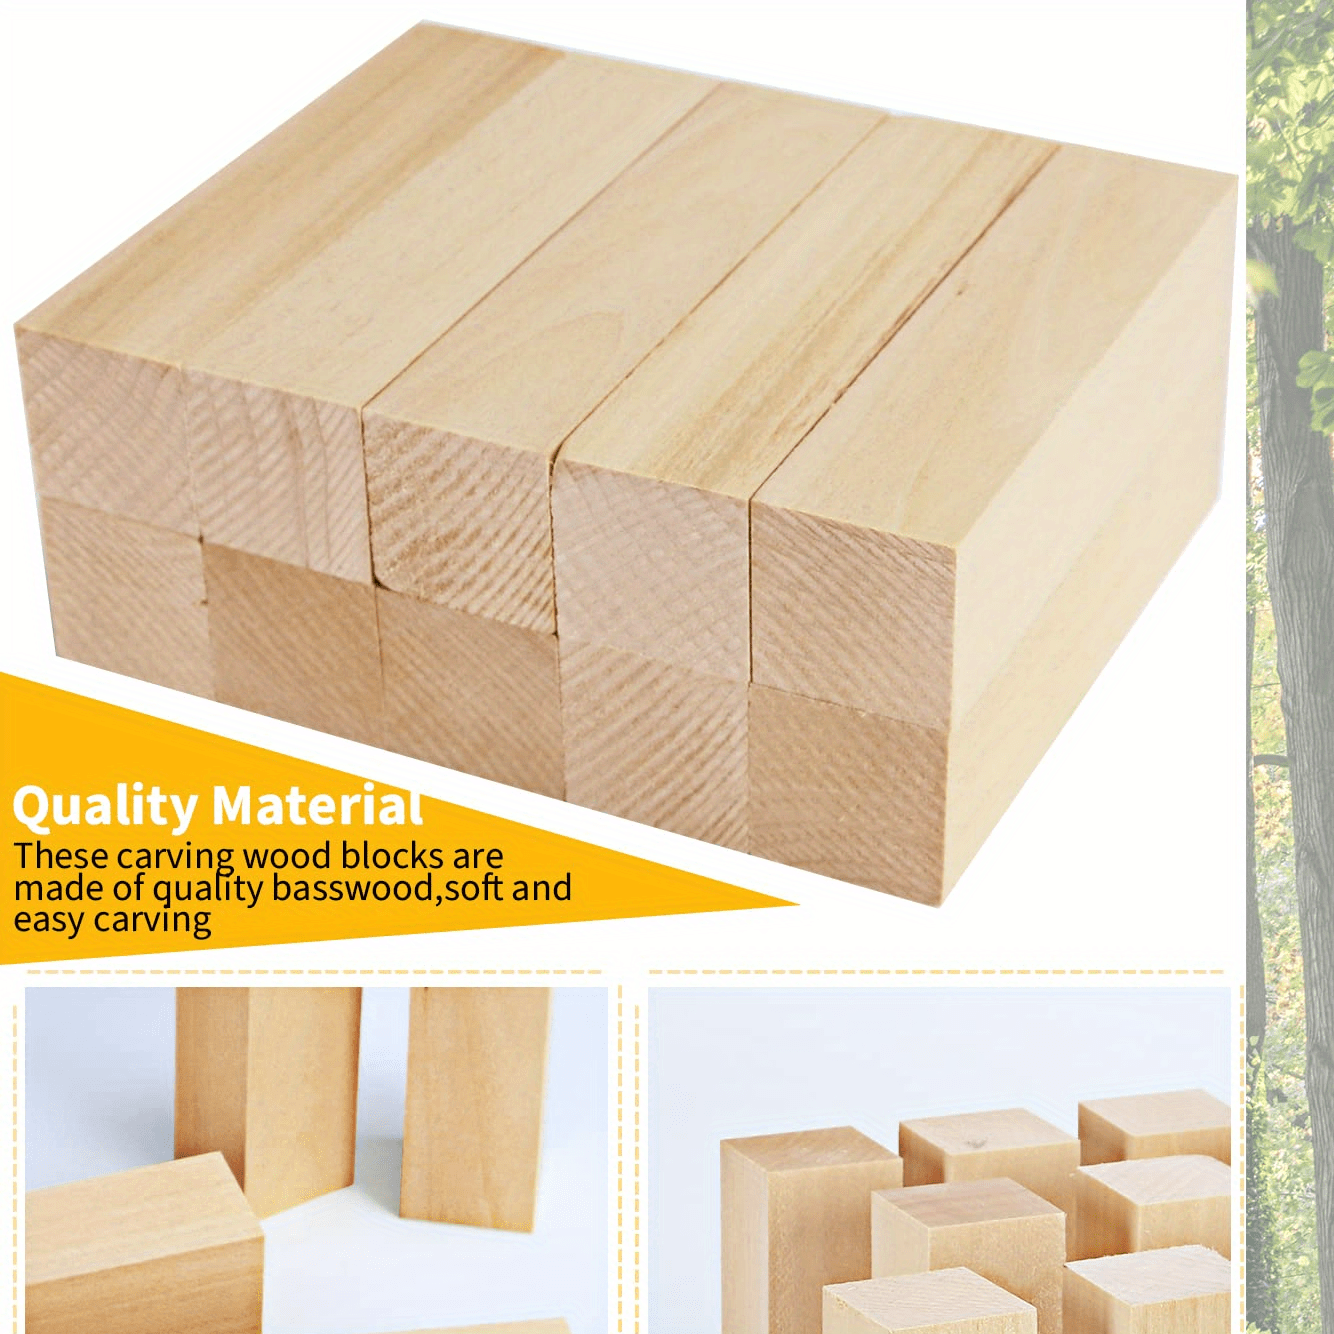 Basswood for Wood Carving - Wood Blocks For Carving, Carving Easy